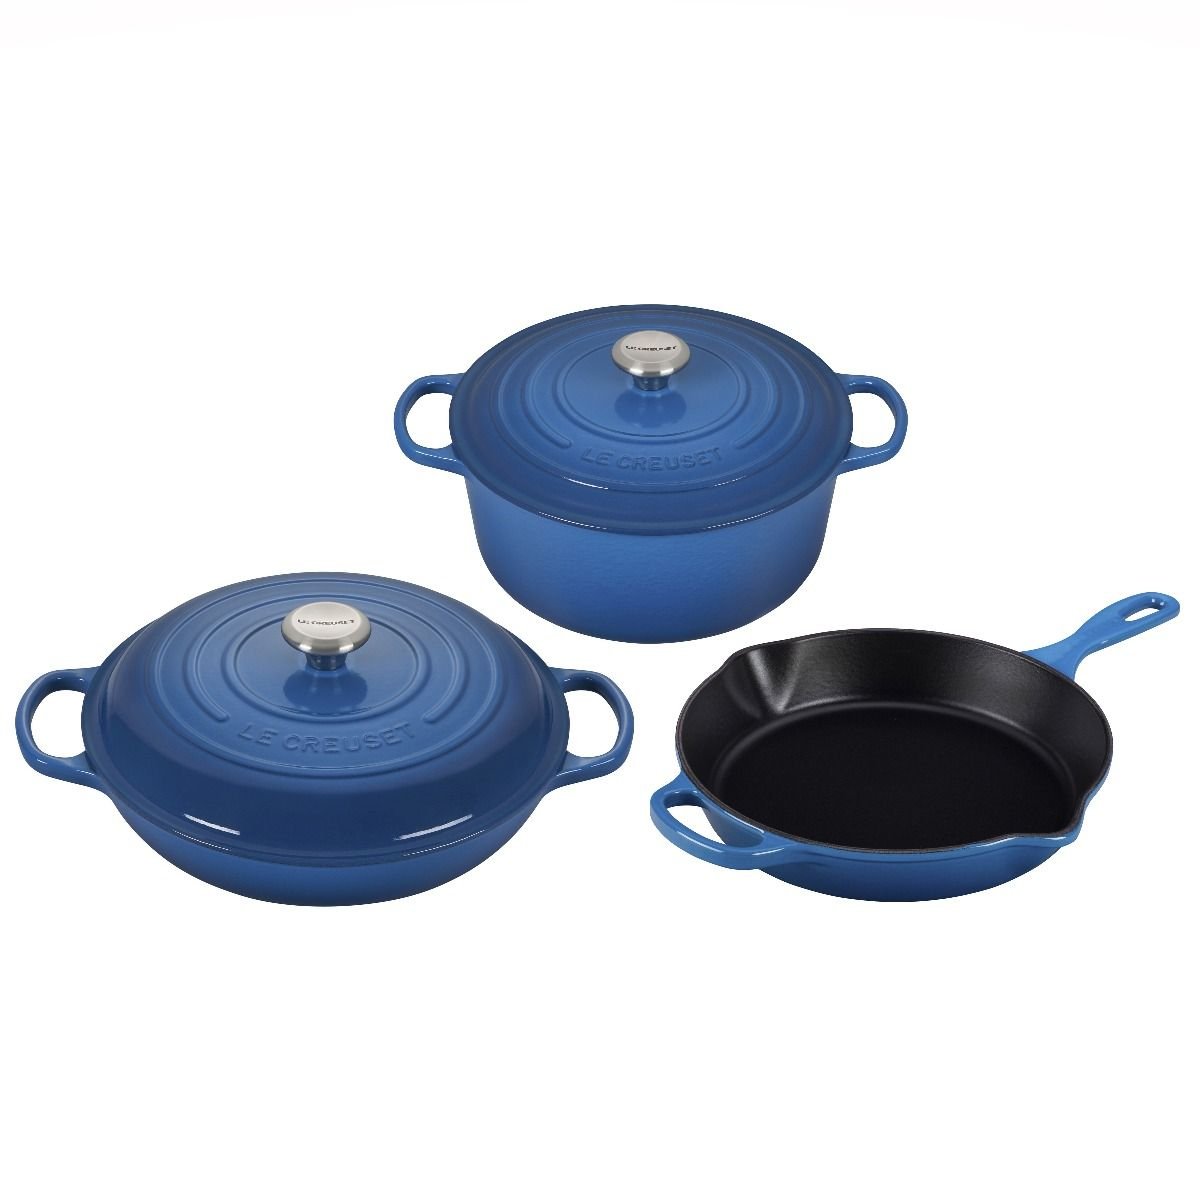 5-Piece Signature Cookware Set with Stainless Steel Knobs - Marseille Blue, Le Creuset